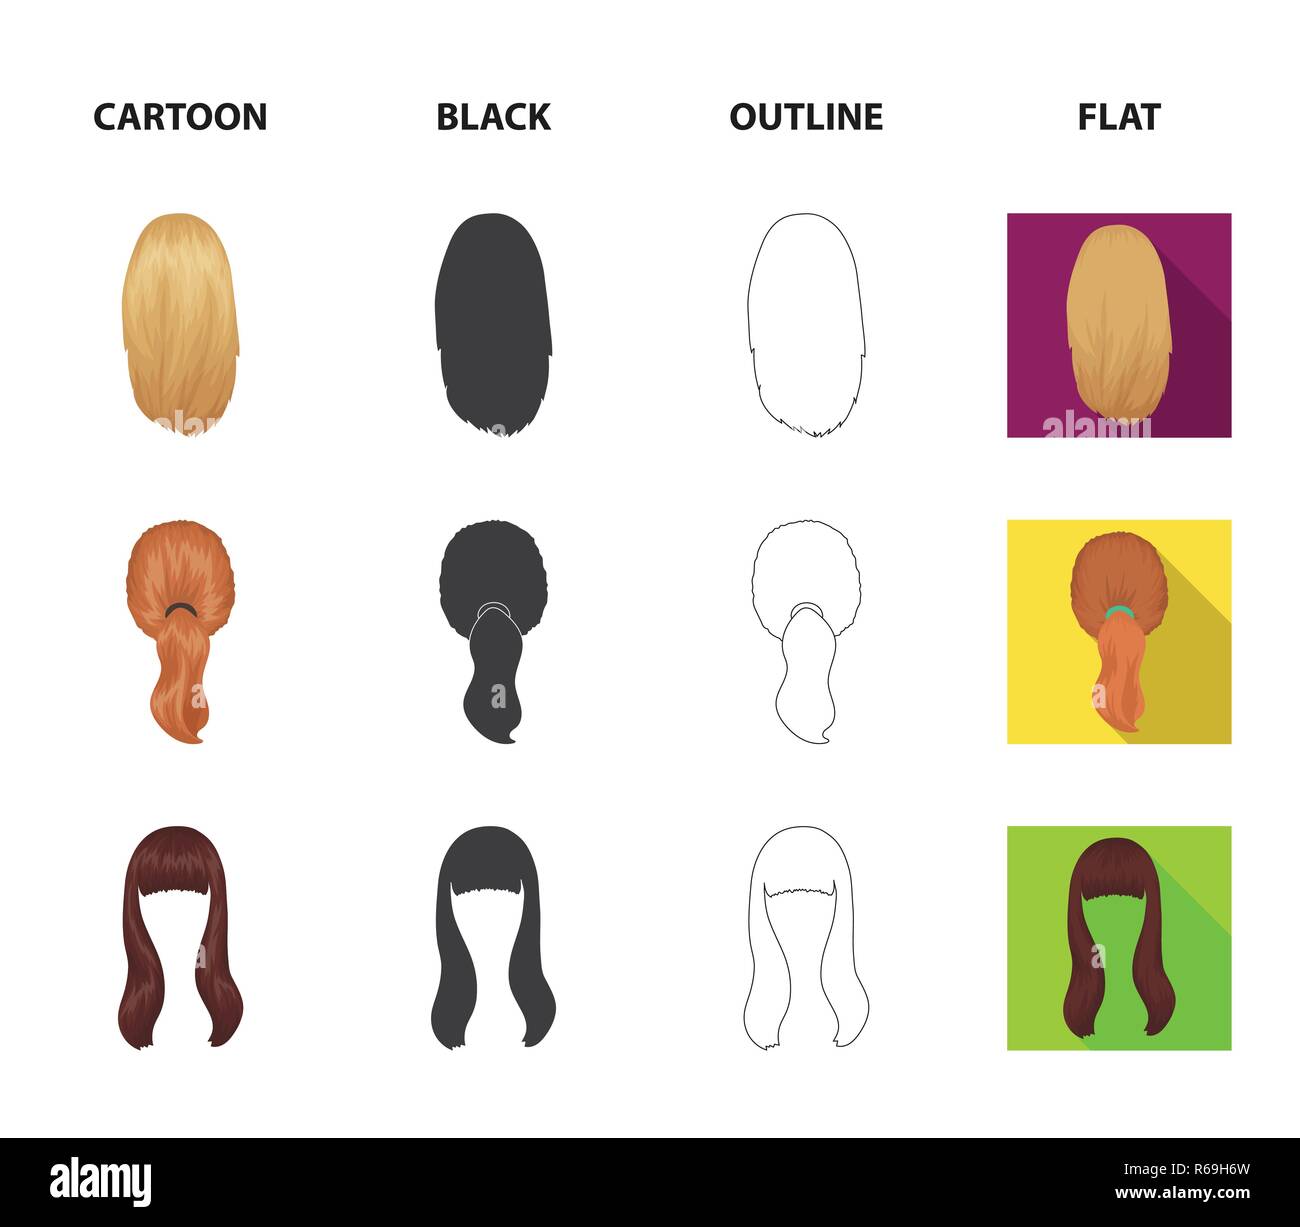 https://c8.alamy.com/comp/R69H6W/light-braid-fish-tail-and-other-types-of-hairstyles-back-hairstyle-set-collection-icons-in-cartoonblackoutlineflat-style-vector-symbol-stock-illu-R69H6W.jpg